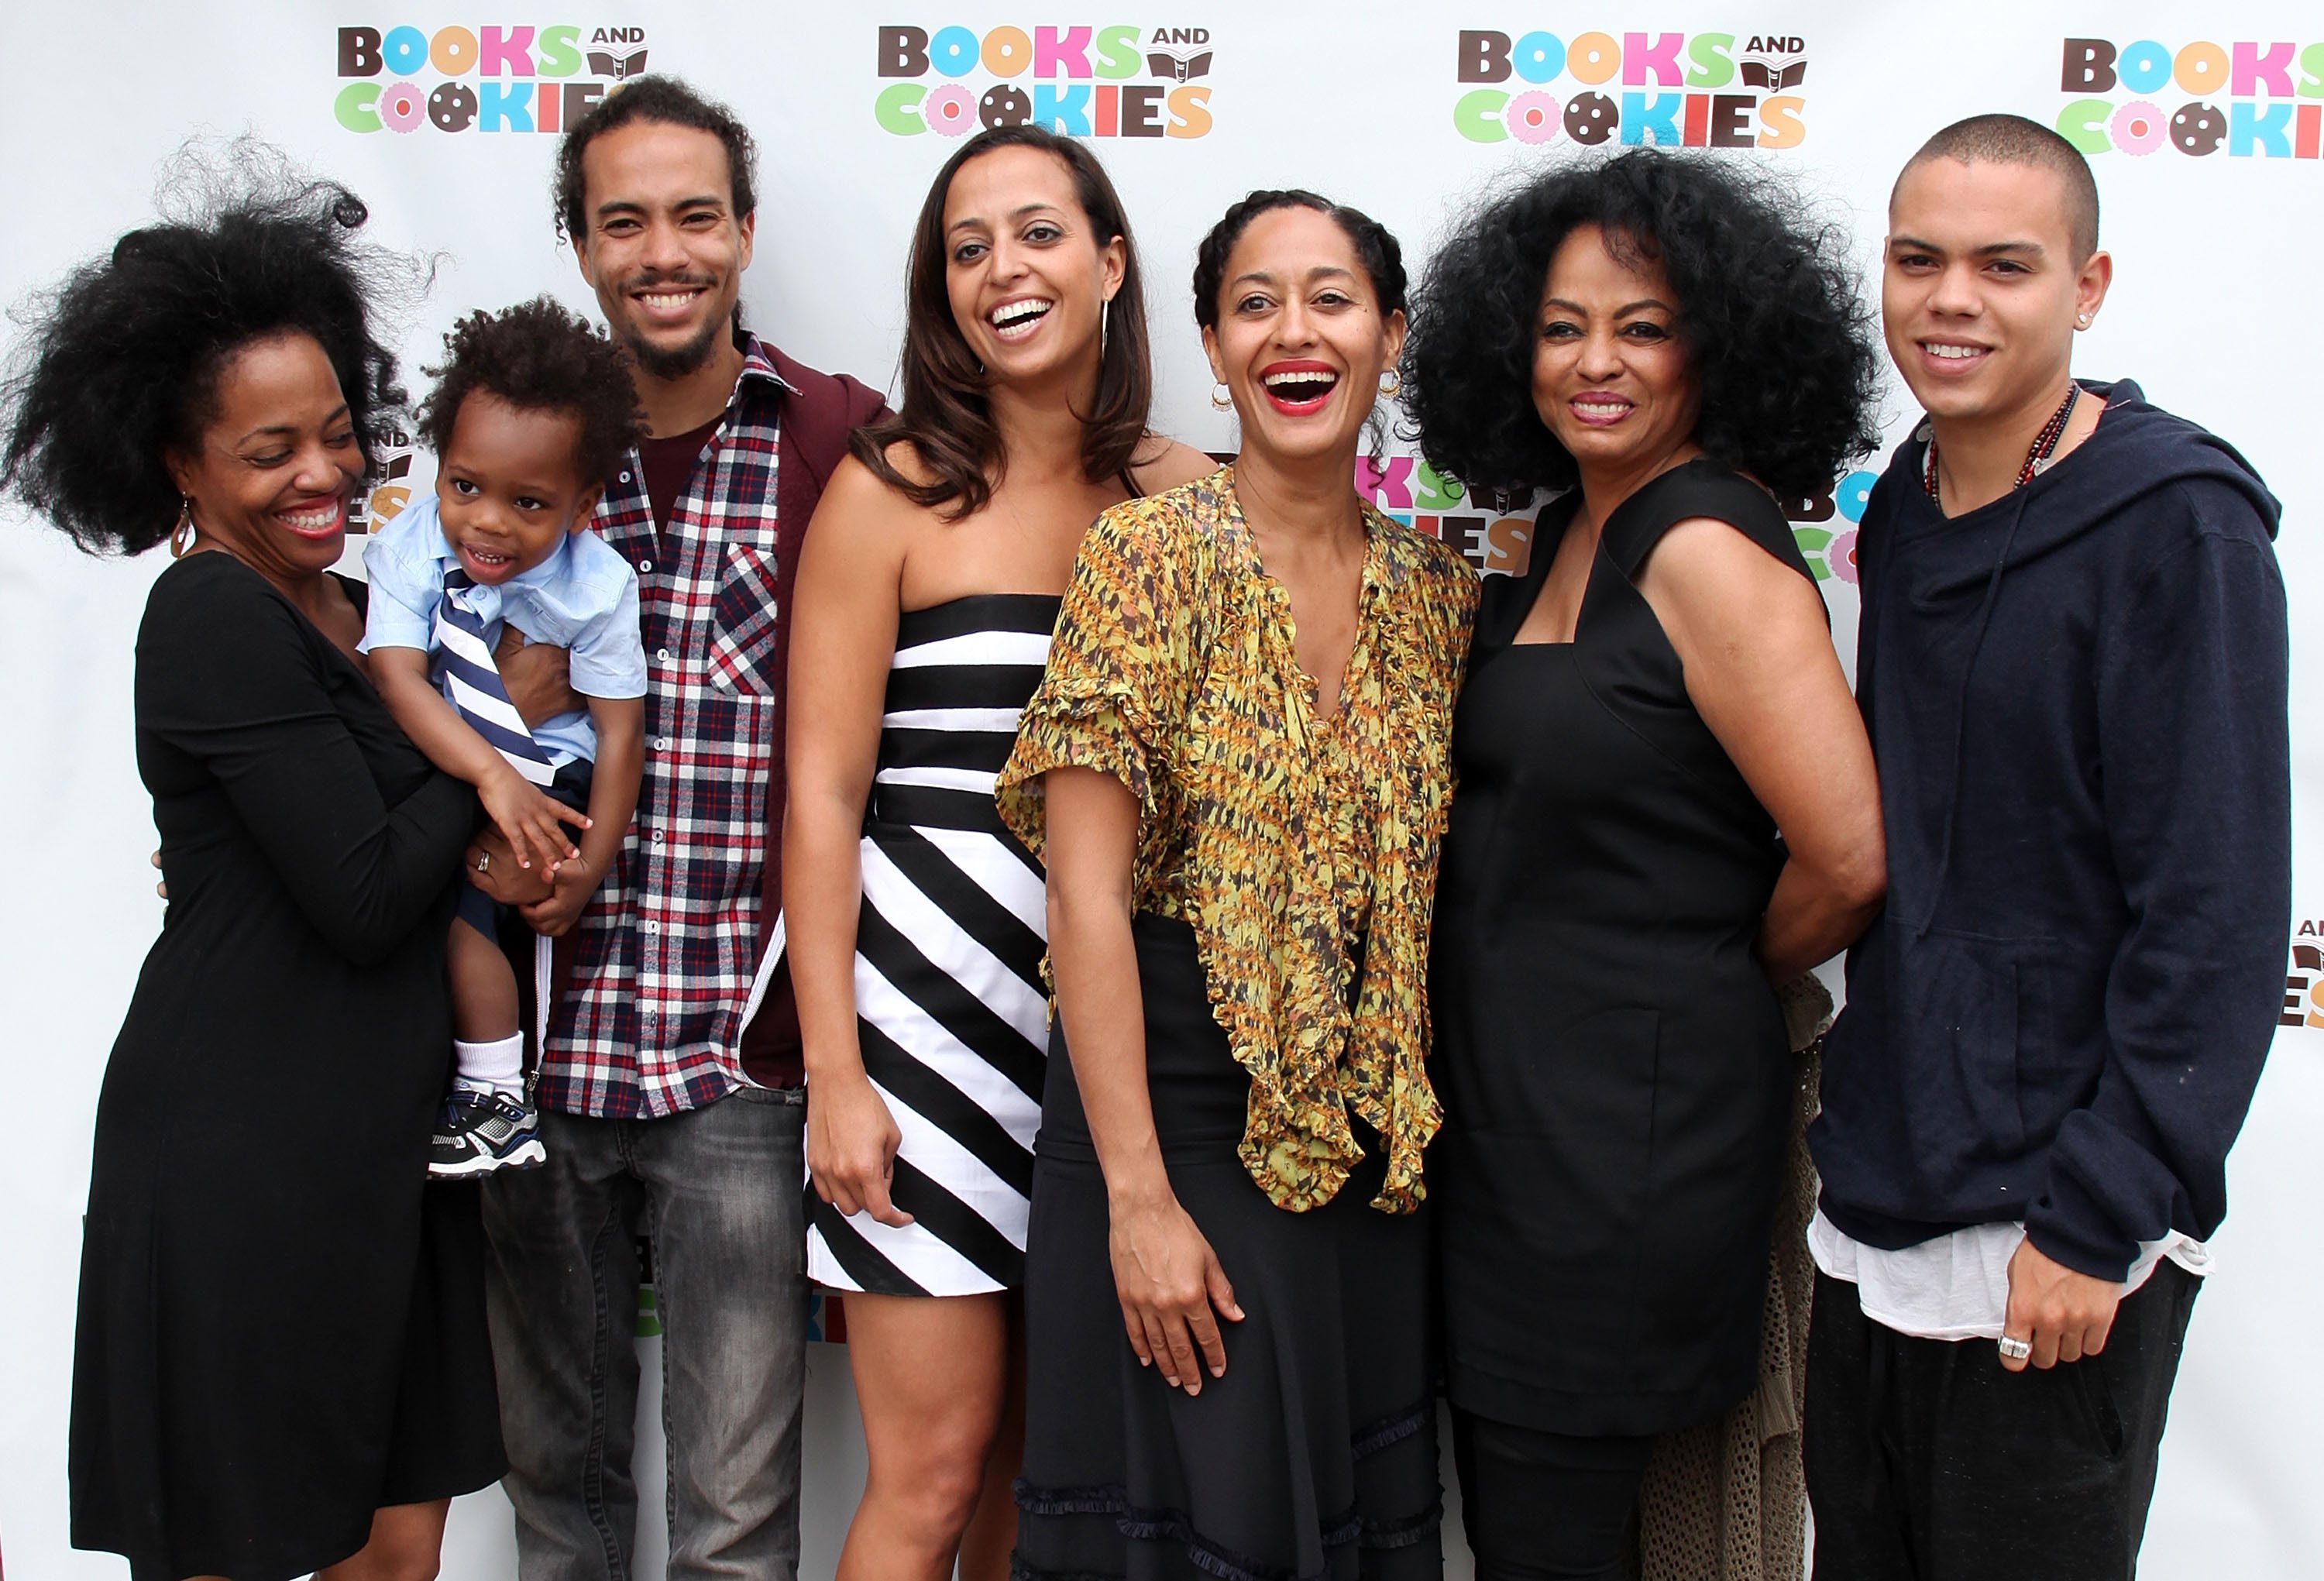 Rhonda Ross Kendrick, Raif Kendrick, Ross Naess, Chudney Ross, Tracee Ellis Ross, Diana Ross and Evan Ross attend Books & Cookies grand opening at Books and Cookies on May 14, 2011 in Santa Monica, California | Photo: Getty Images